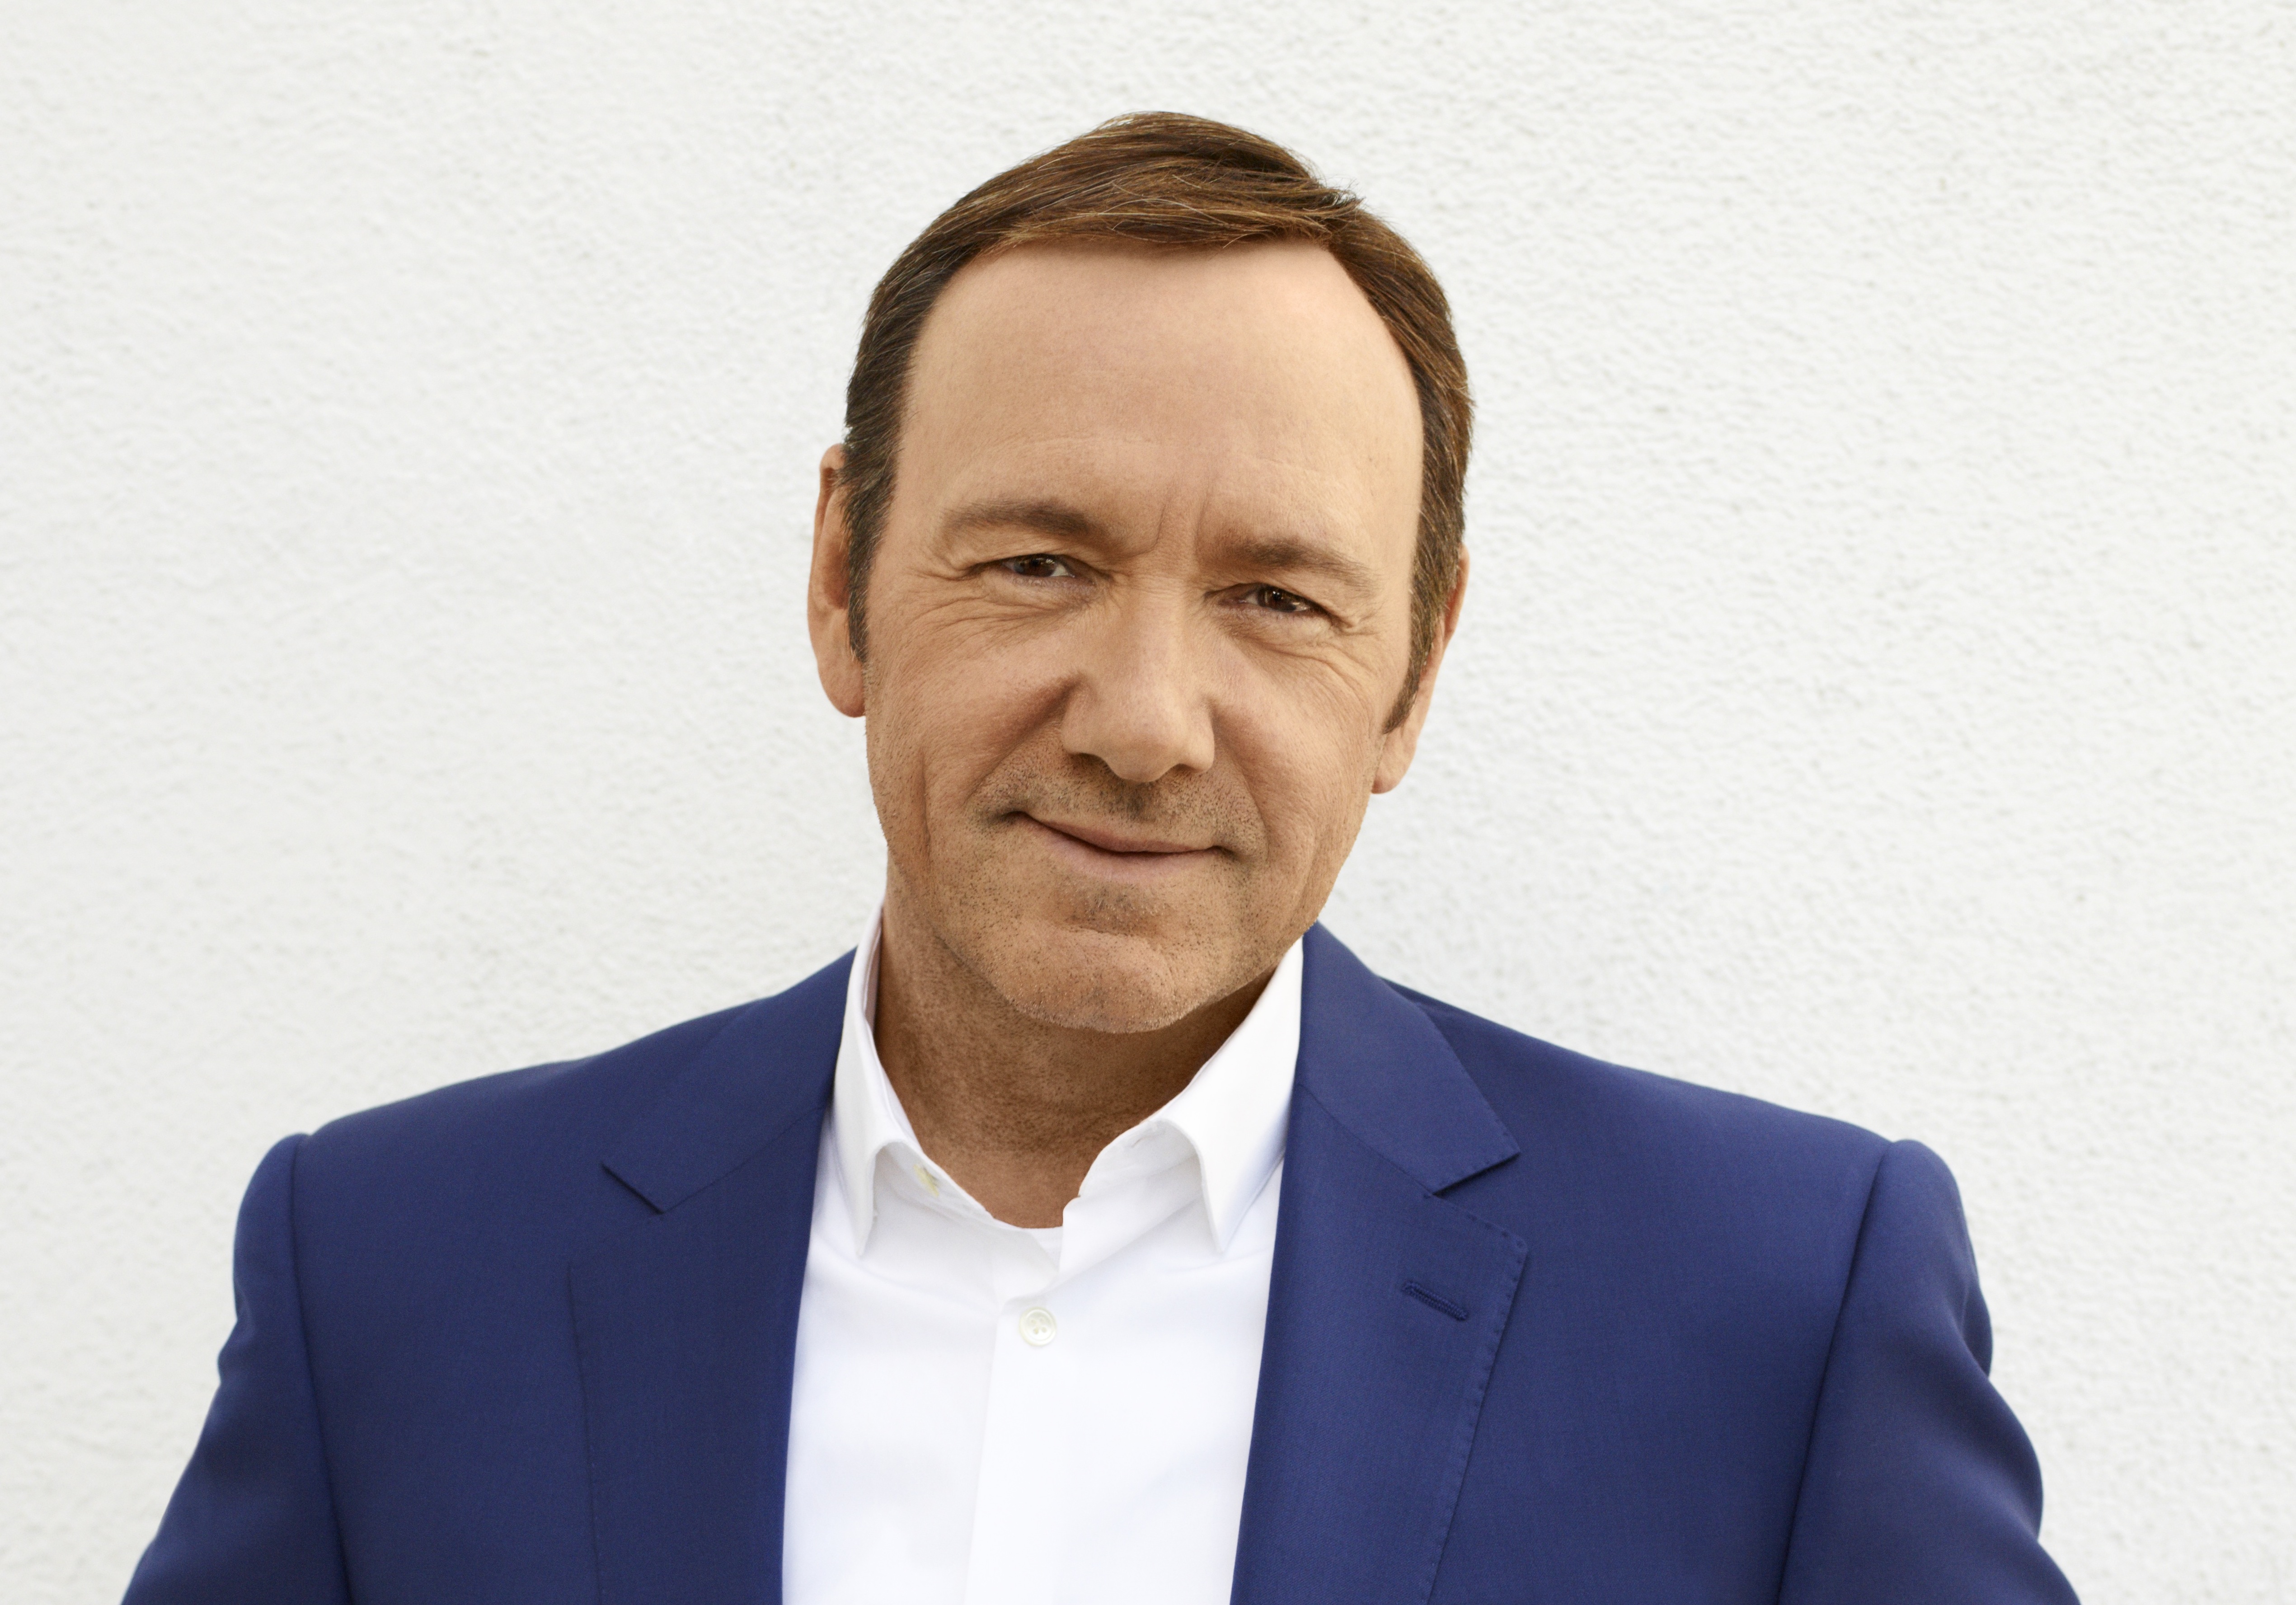 Nice Images Collection: Kevin Spacey Desktop Wallpapers